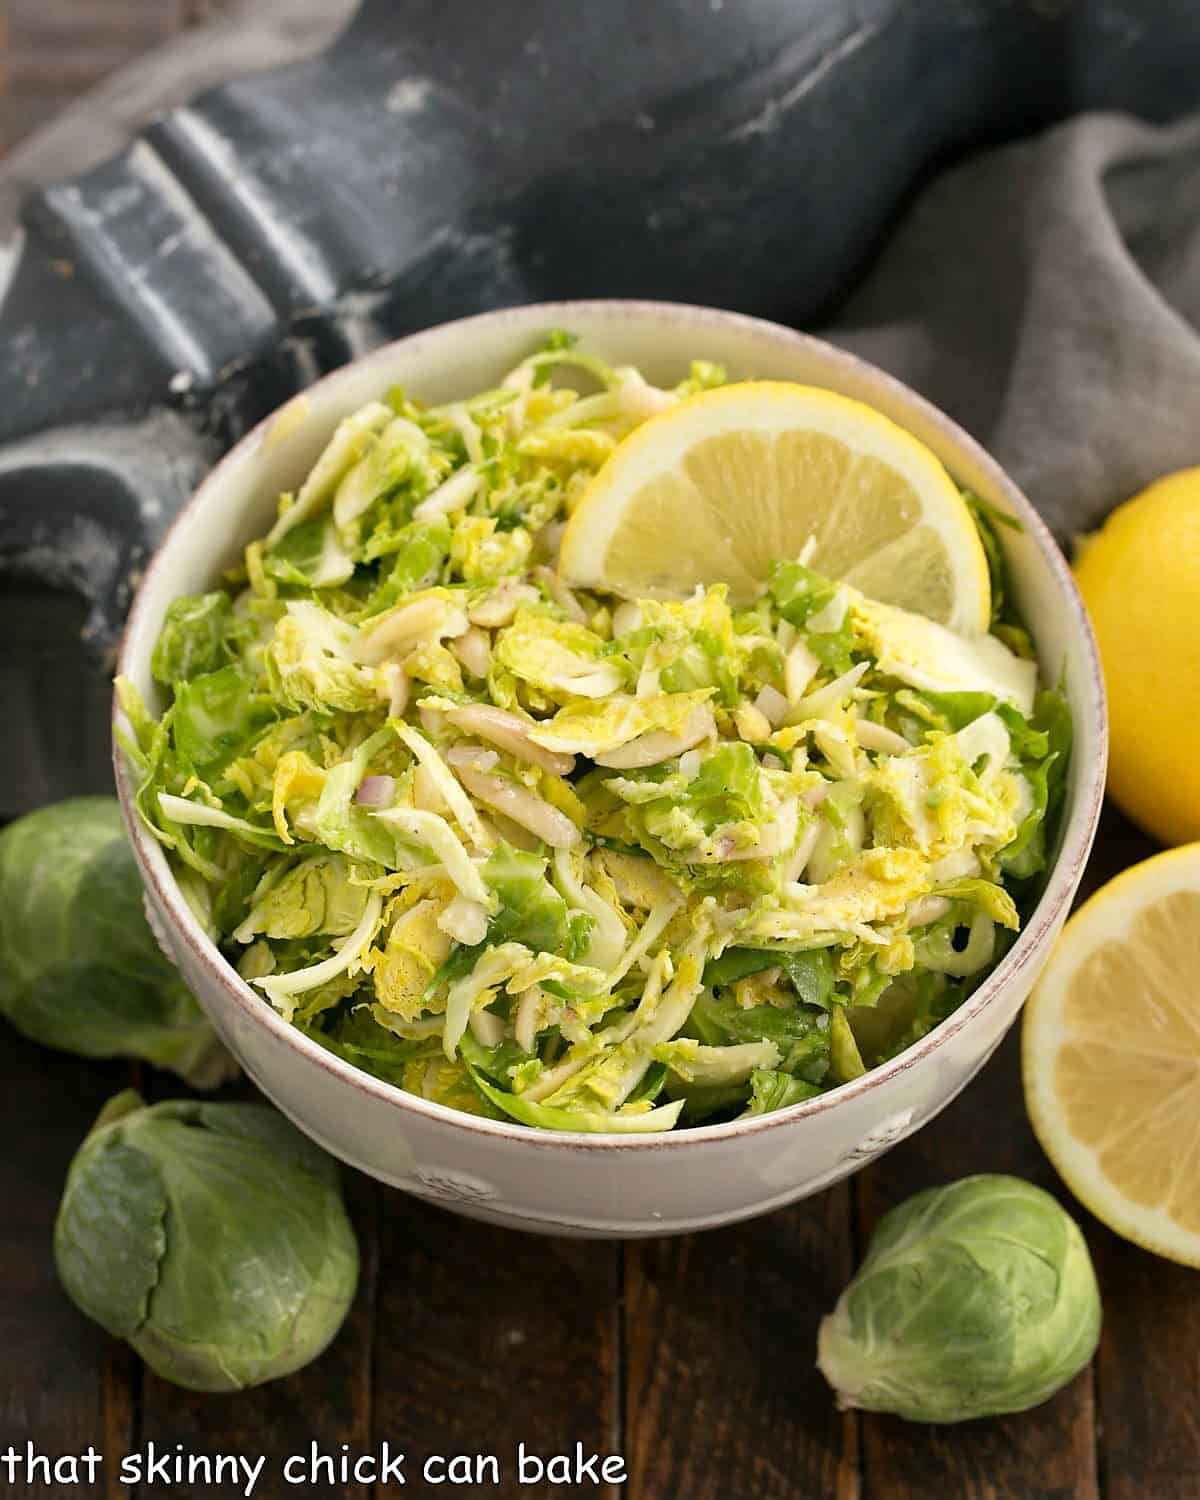 Shaved Brussels sprouts salad in a white serving bowl.